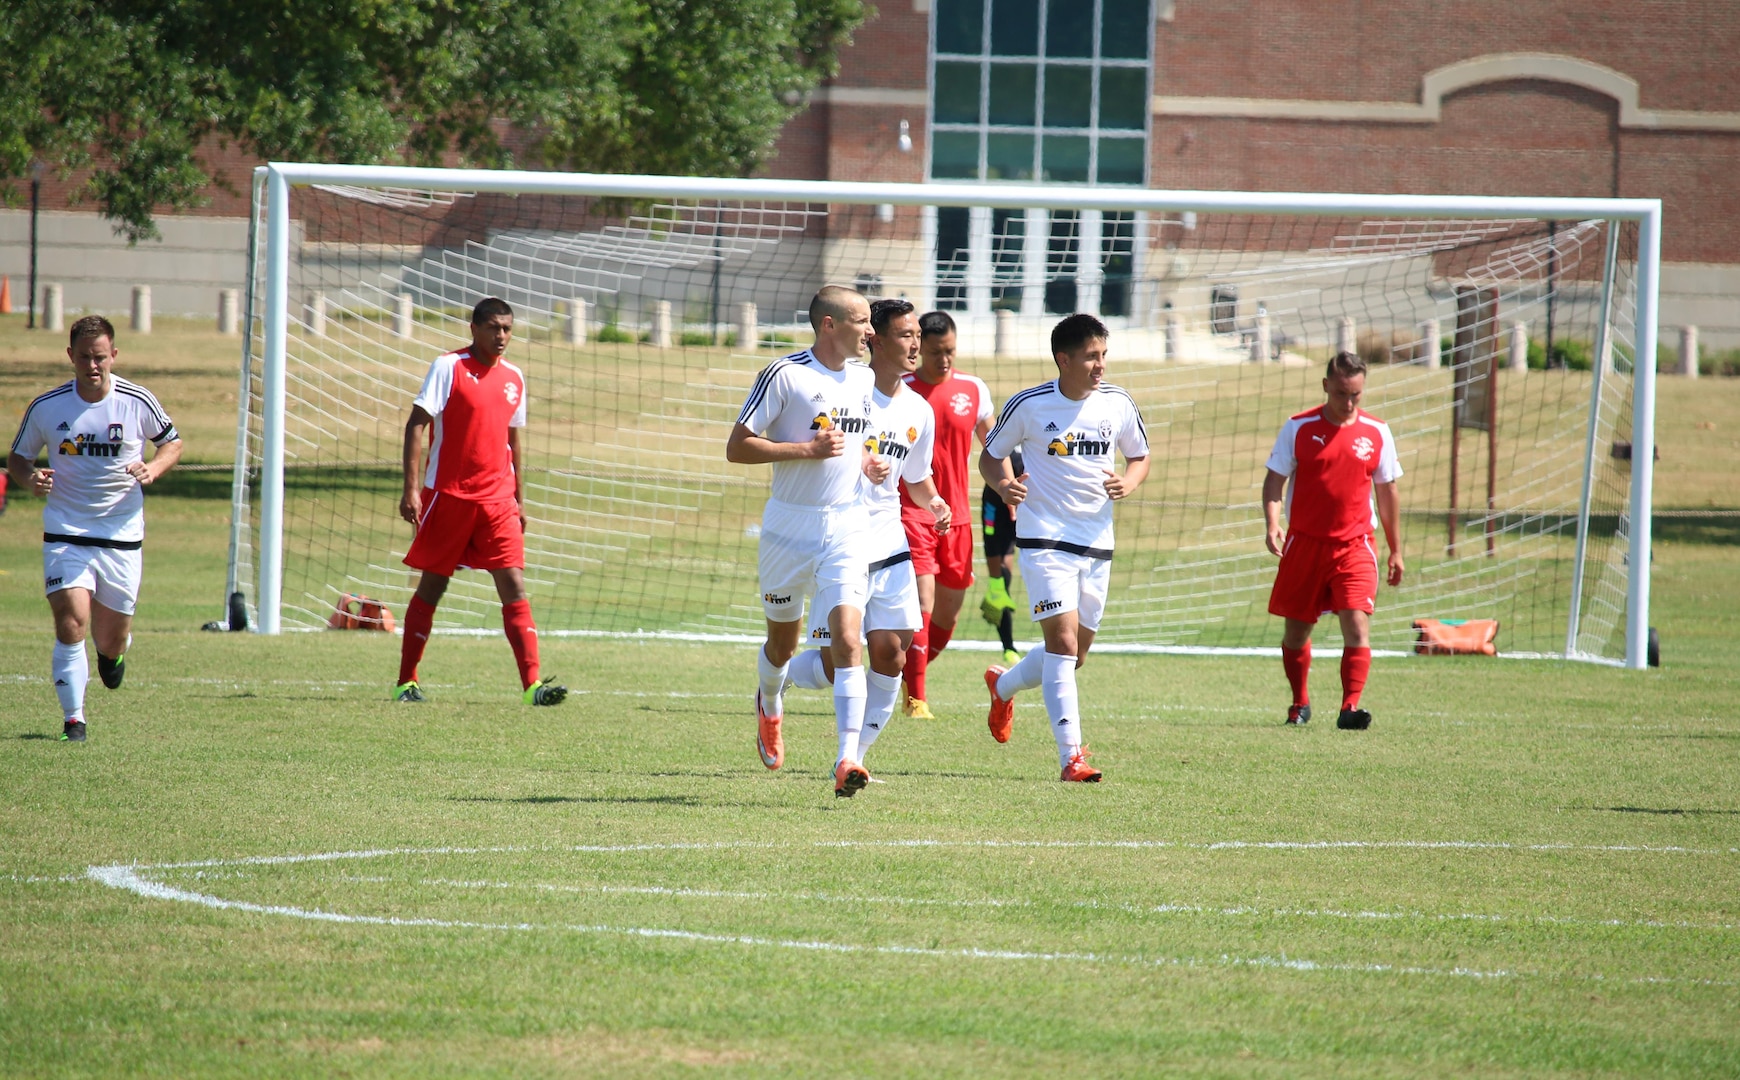 Fort Benning, Ga. - Army Sgt. Joseph Karslo (third from left), scores Army's second goal in the consolation match of the 2016 Armed Forces Men's Soccer Championship hosted at Fort Benning, Ga from 6-14 May 2016.  Marine Corps would go on to win the contest 3-2 to take third place.